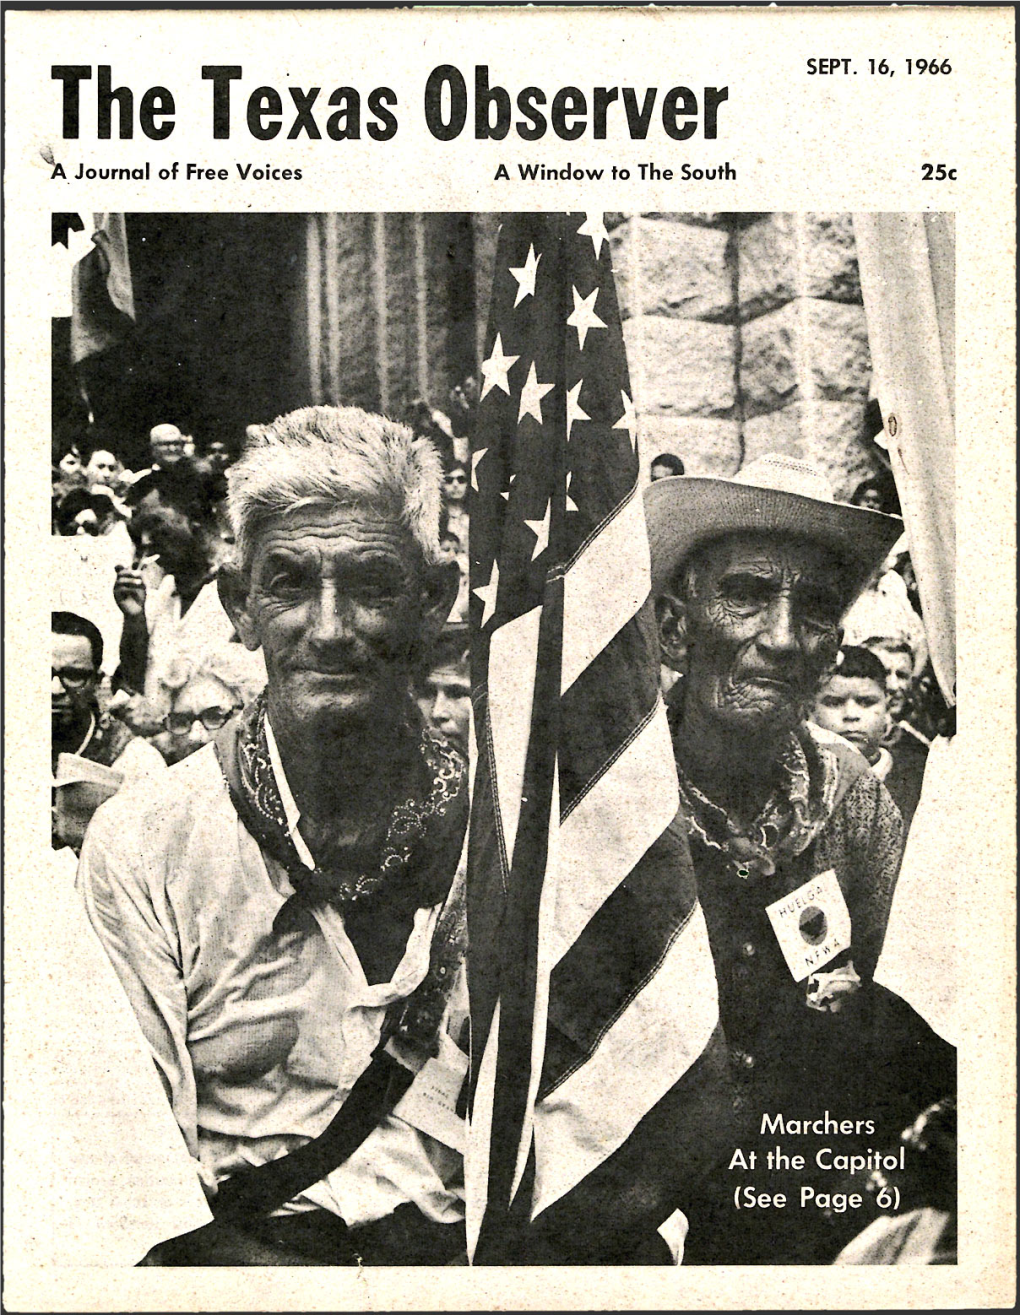 The Texas Observer SEPT. 16, 1966 a Journal of Free Voices a Window to the South 25C